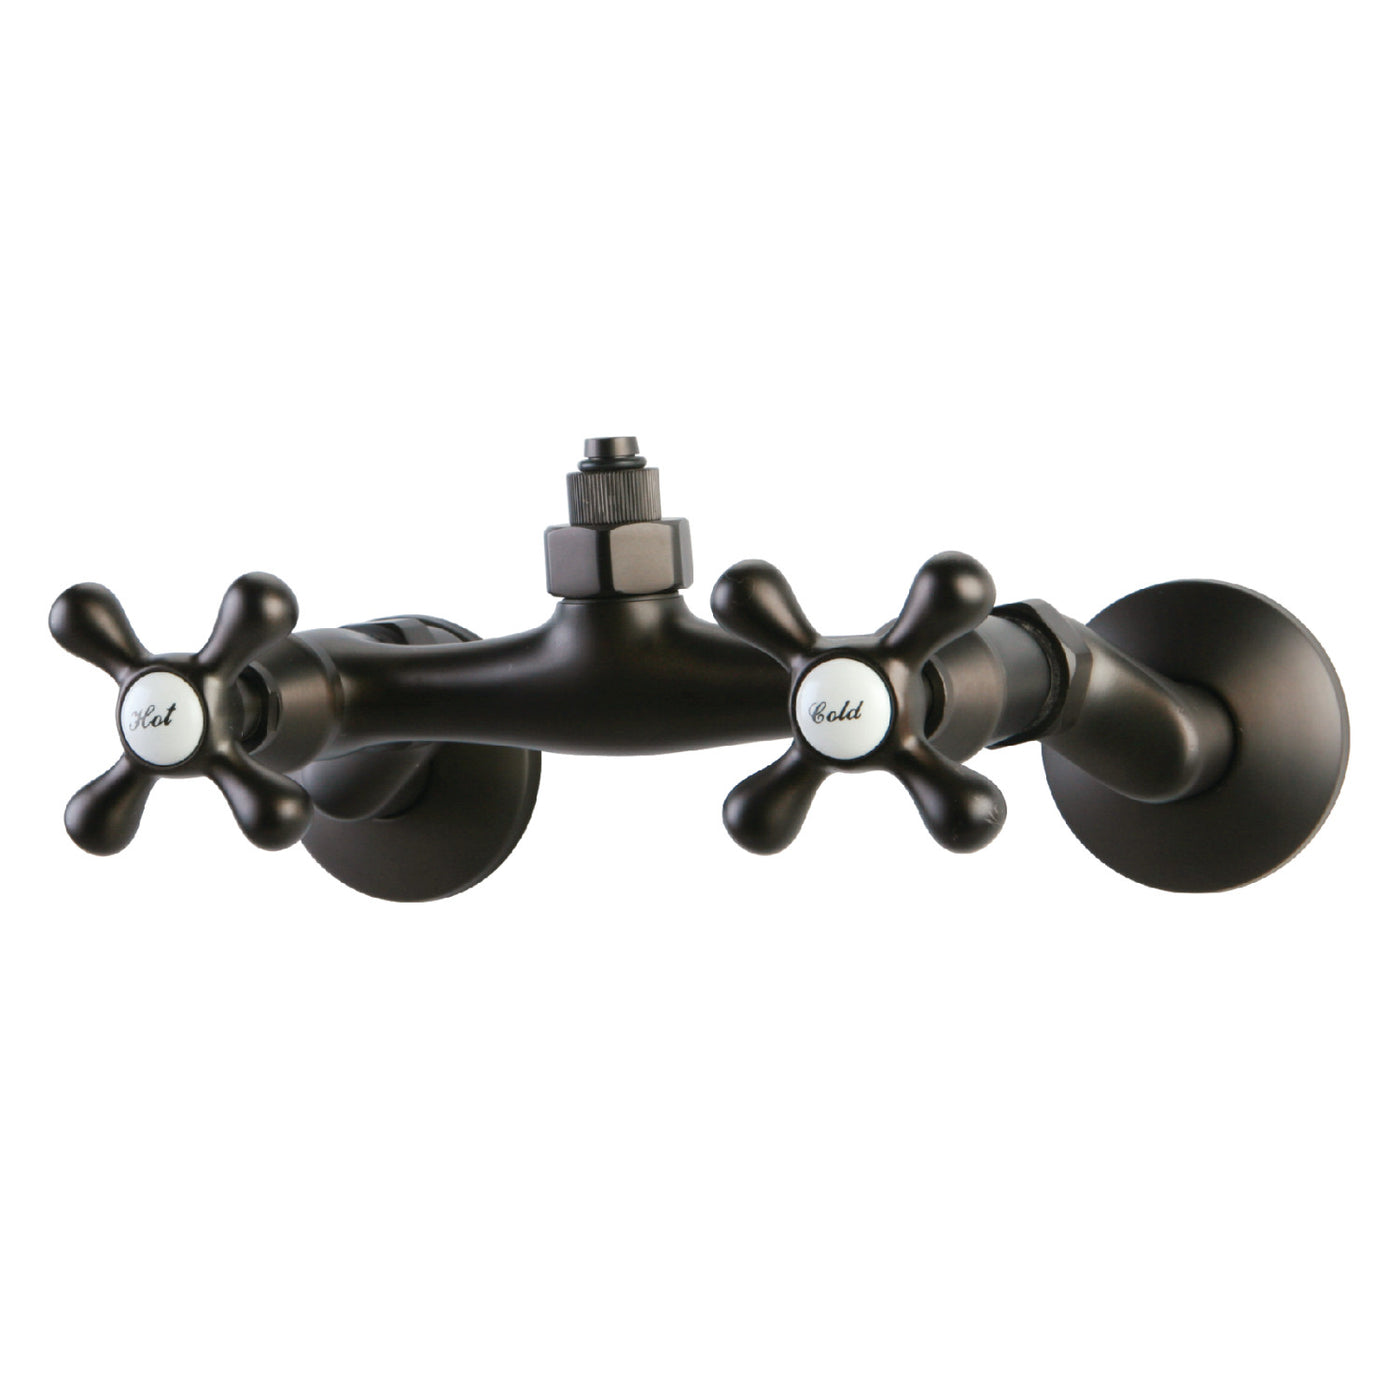 Elements of Design ED2135 Wall Mount Tub Faucet Body with Riser Adapter, Oil Rubbed Bronze